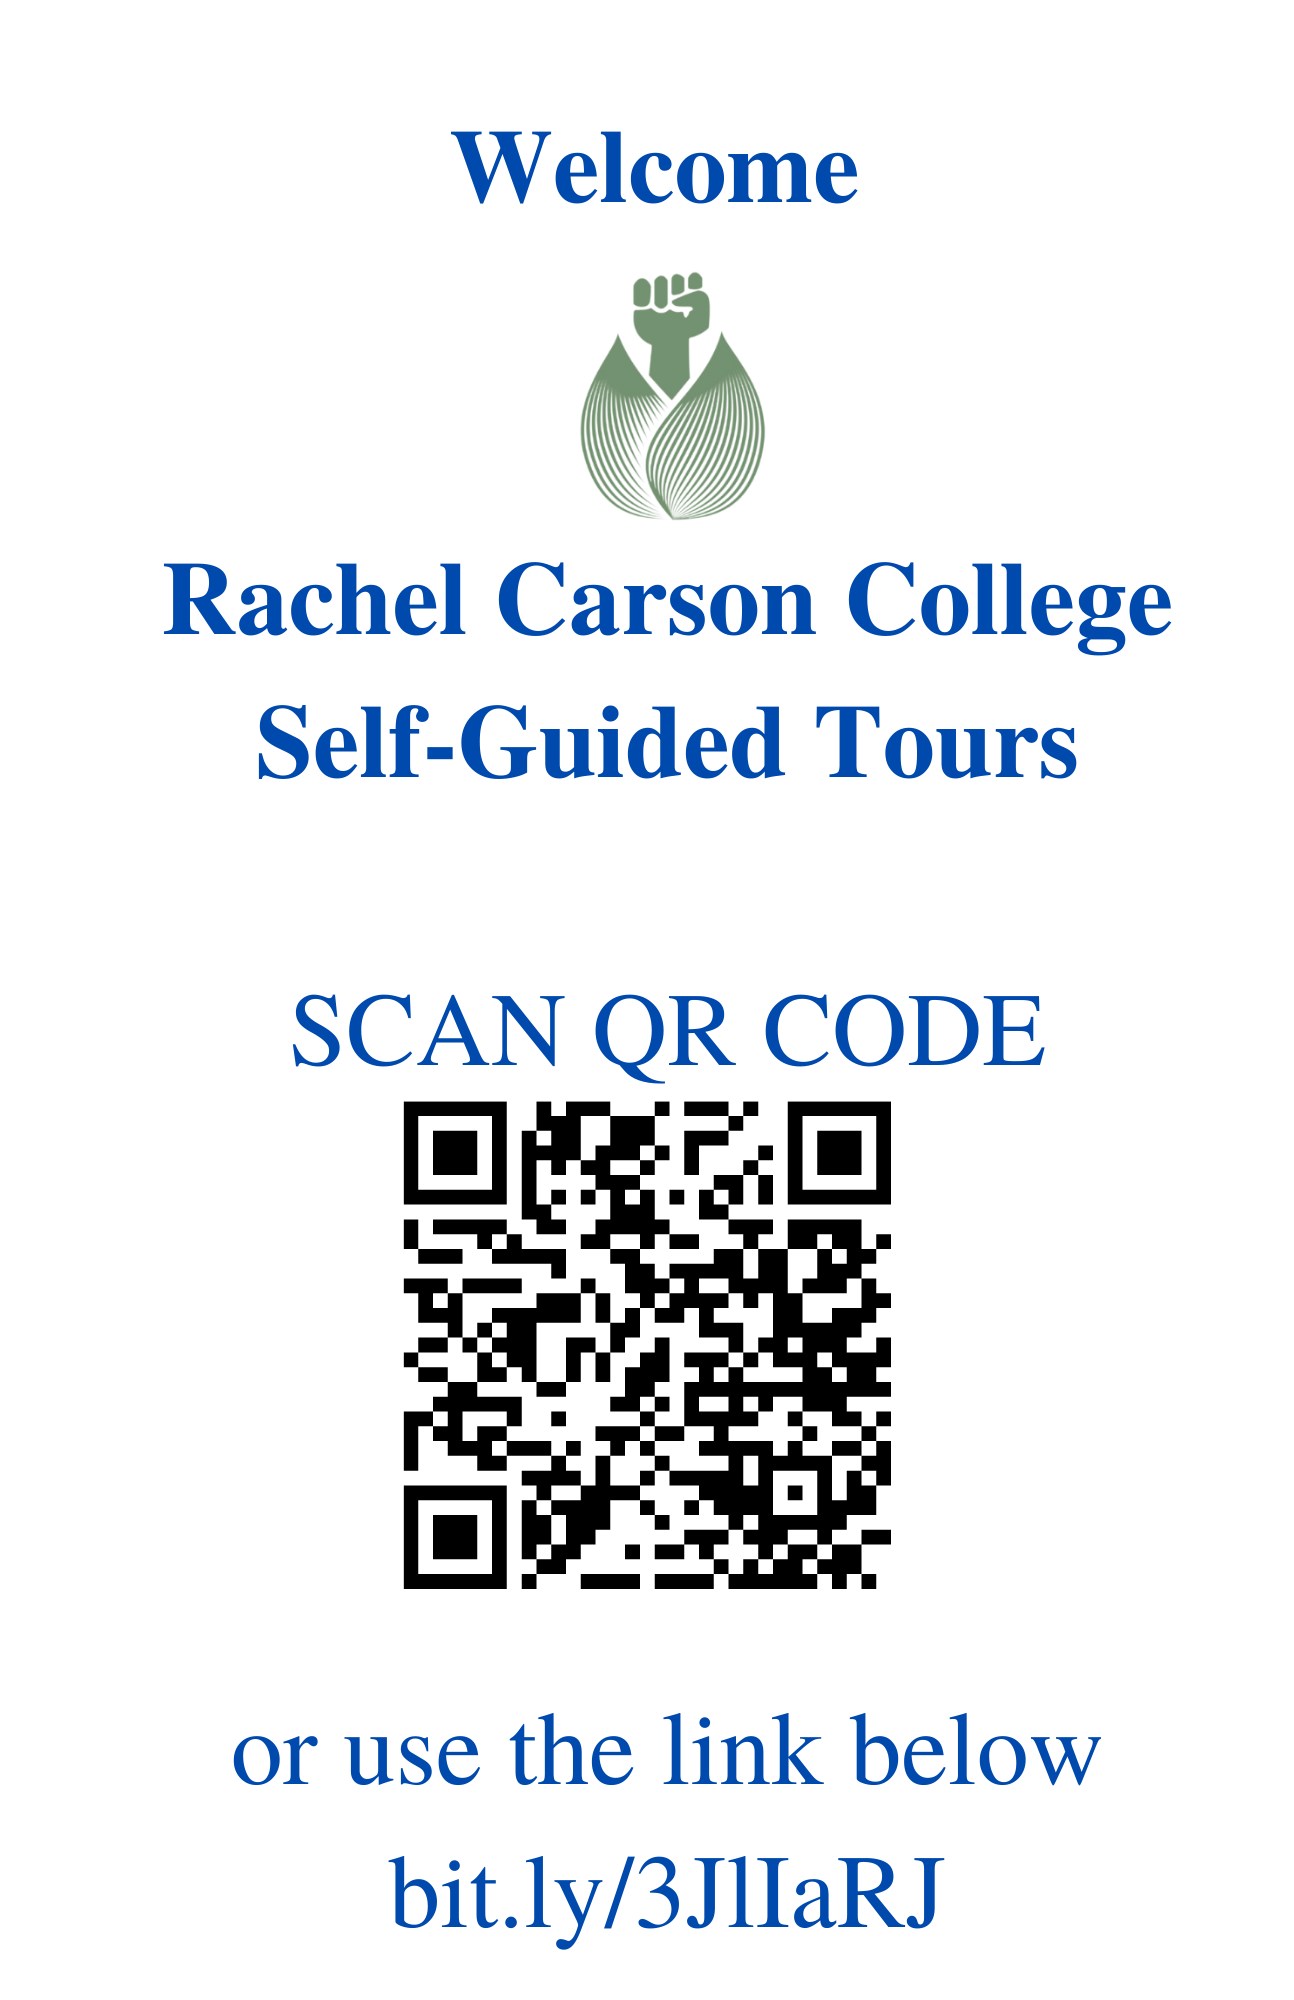 rcc-self-guided-tours.png